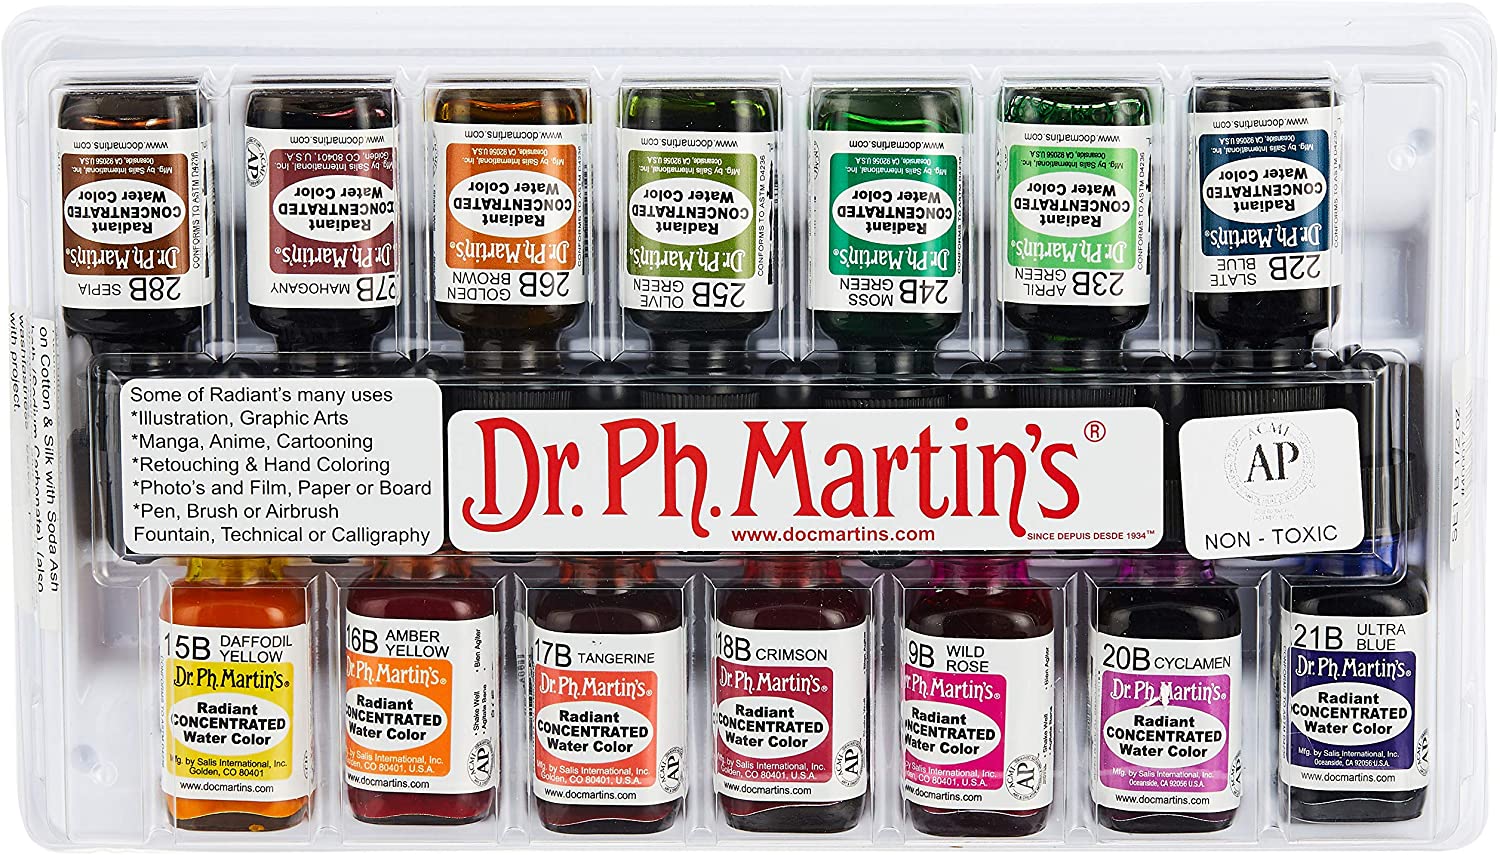 Dr. Ph. Martin's Radiant Concentrated Watercolor 0.5oz Amber Yellow